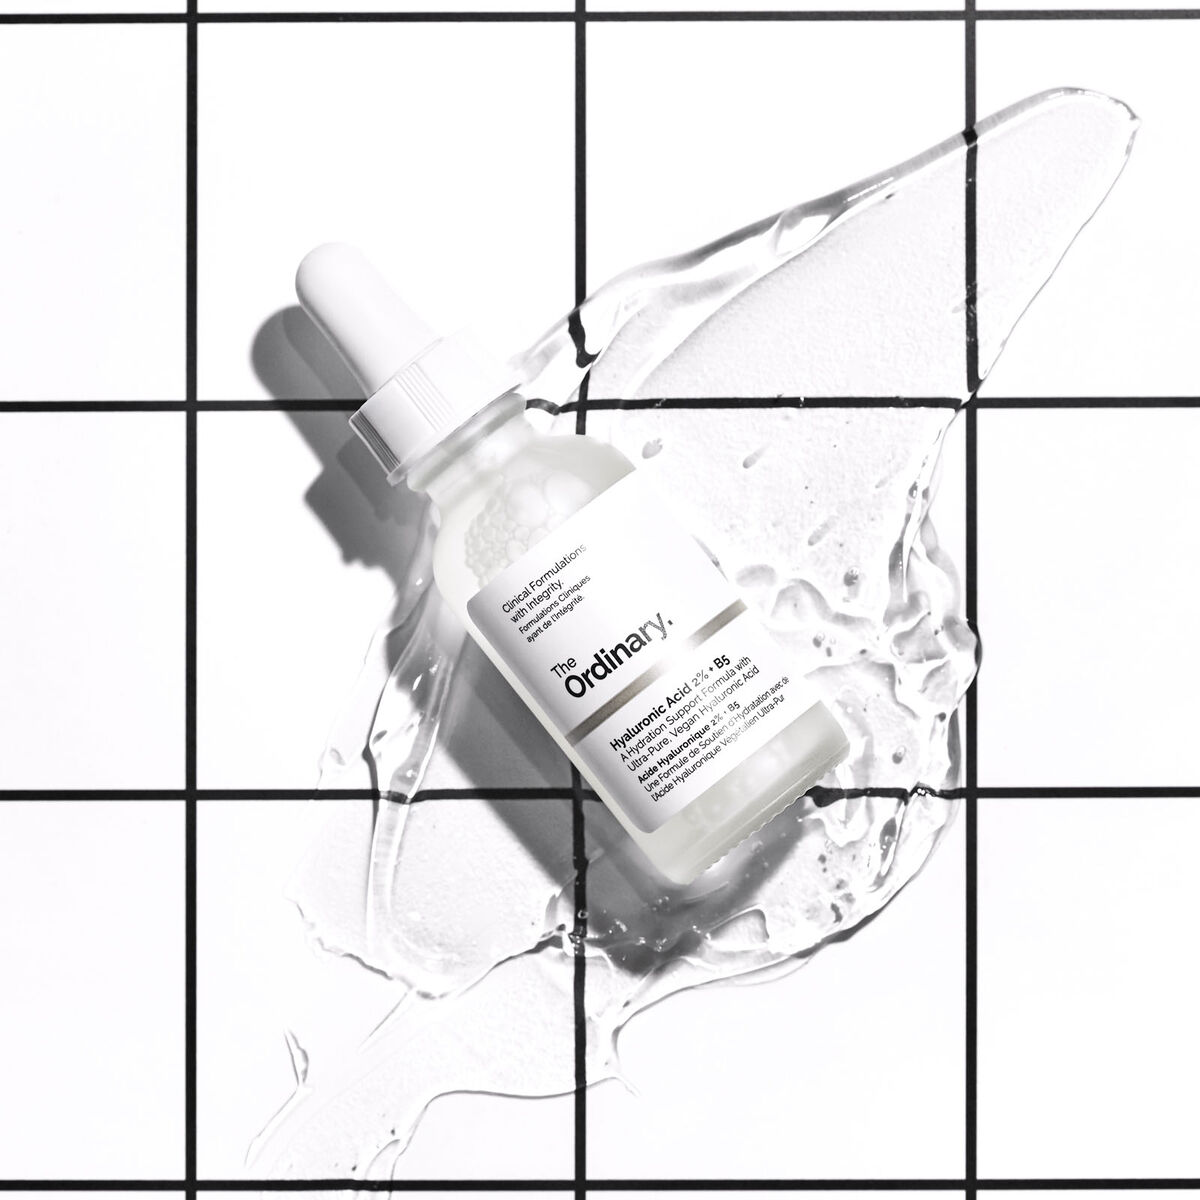 The Ordinary Hyaluronic Acid 2% + B5, add to your skincare routine!